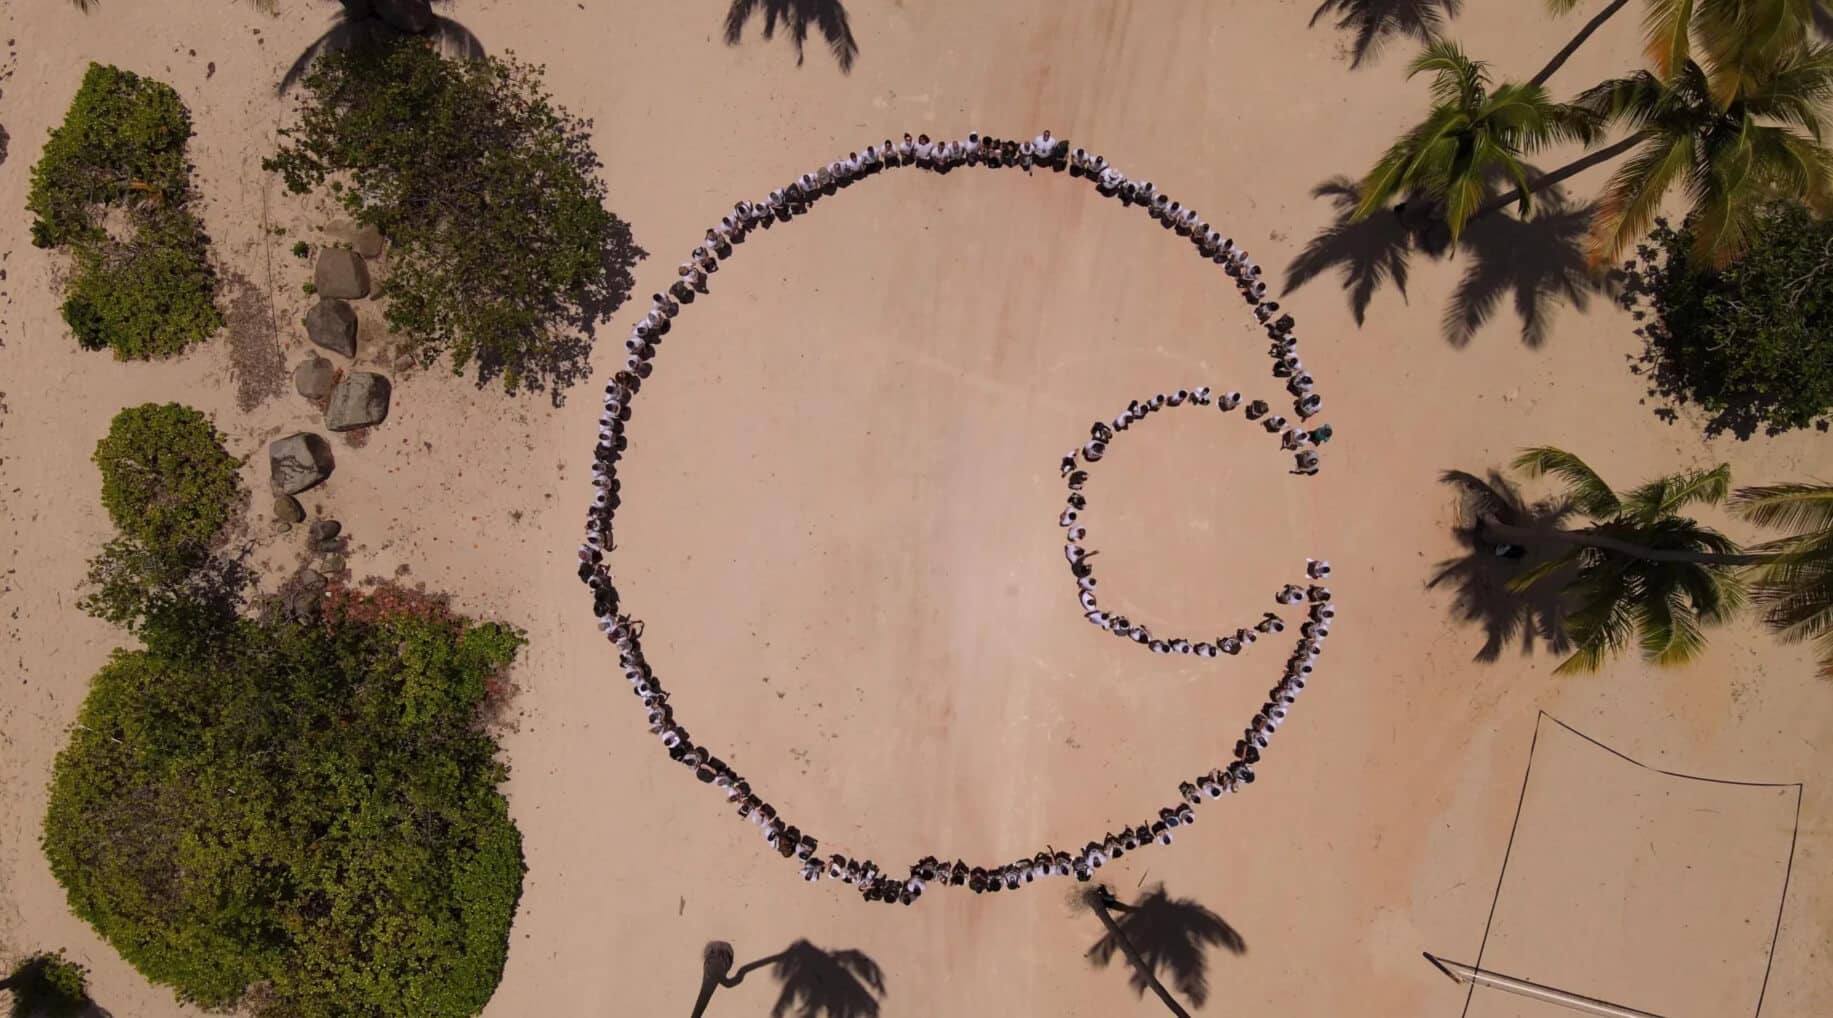 About a group of people forming a circle on the beach.